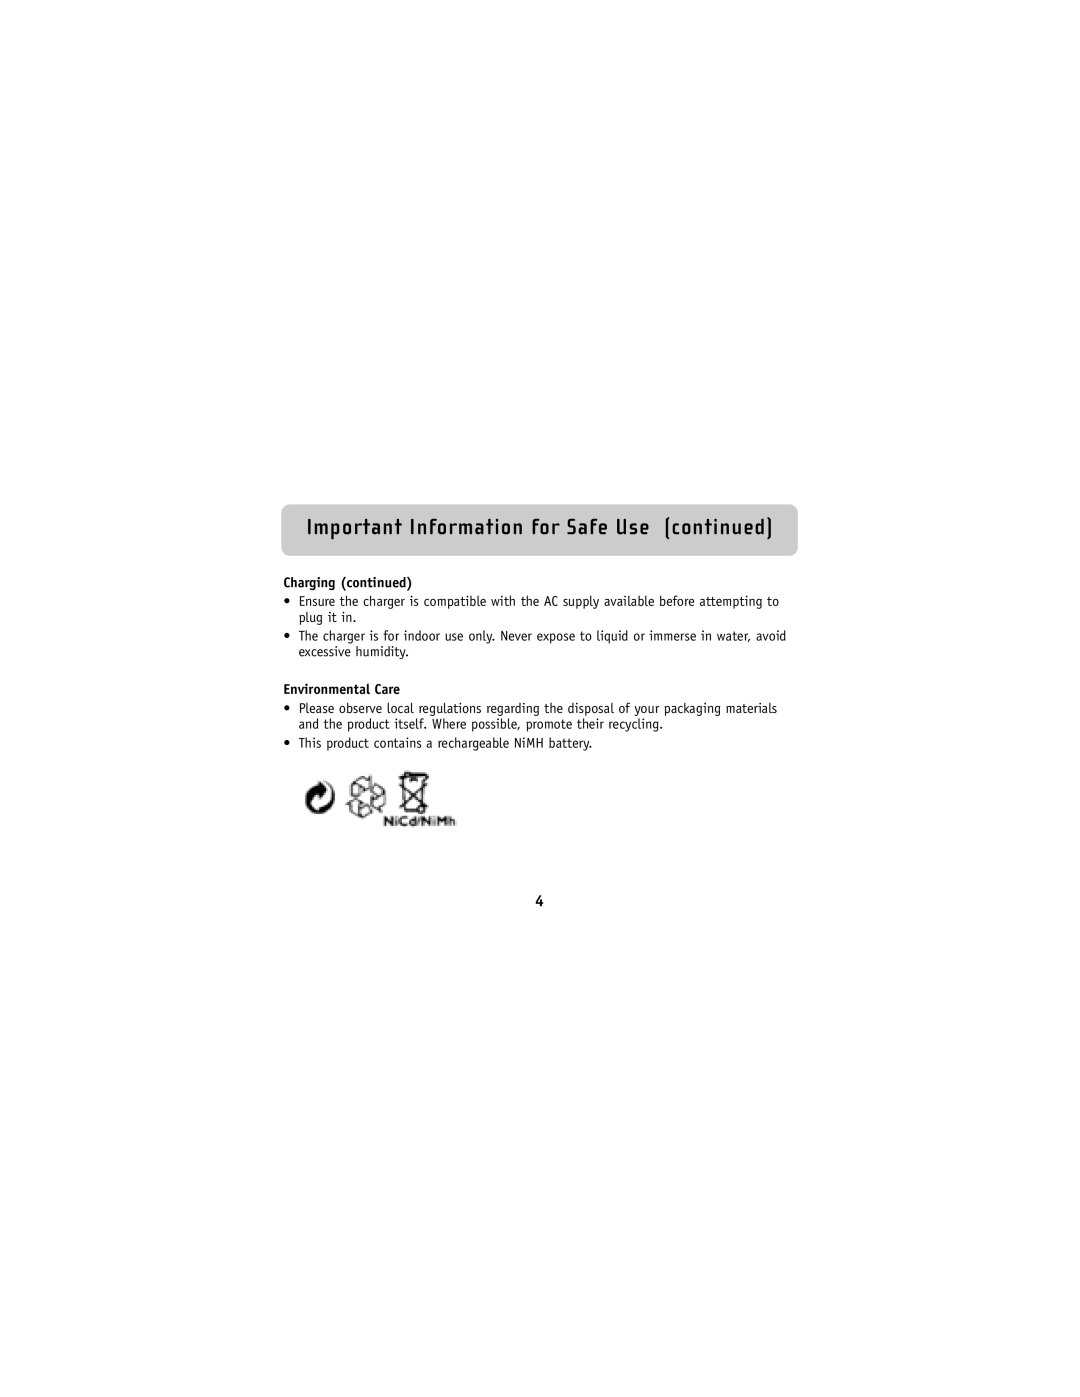 Belkin F8V9017 user manual Charging continued, Environmental Care, Important Information for Safe Use continued 